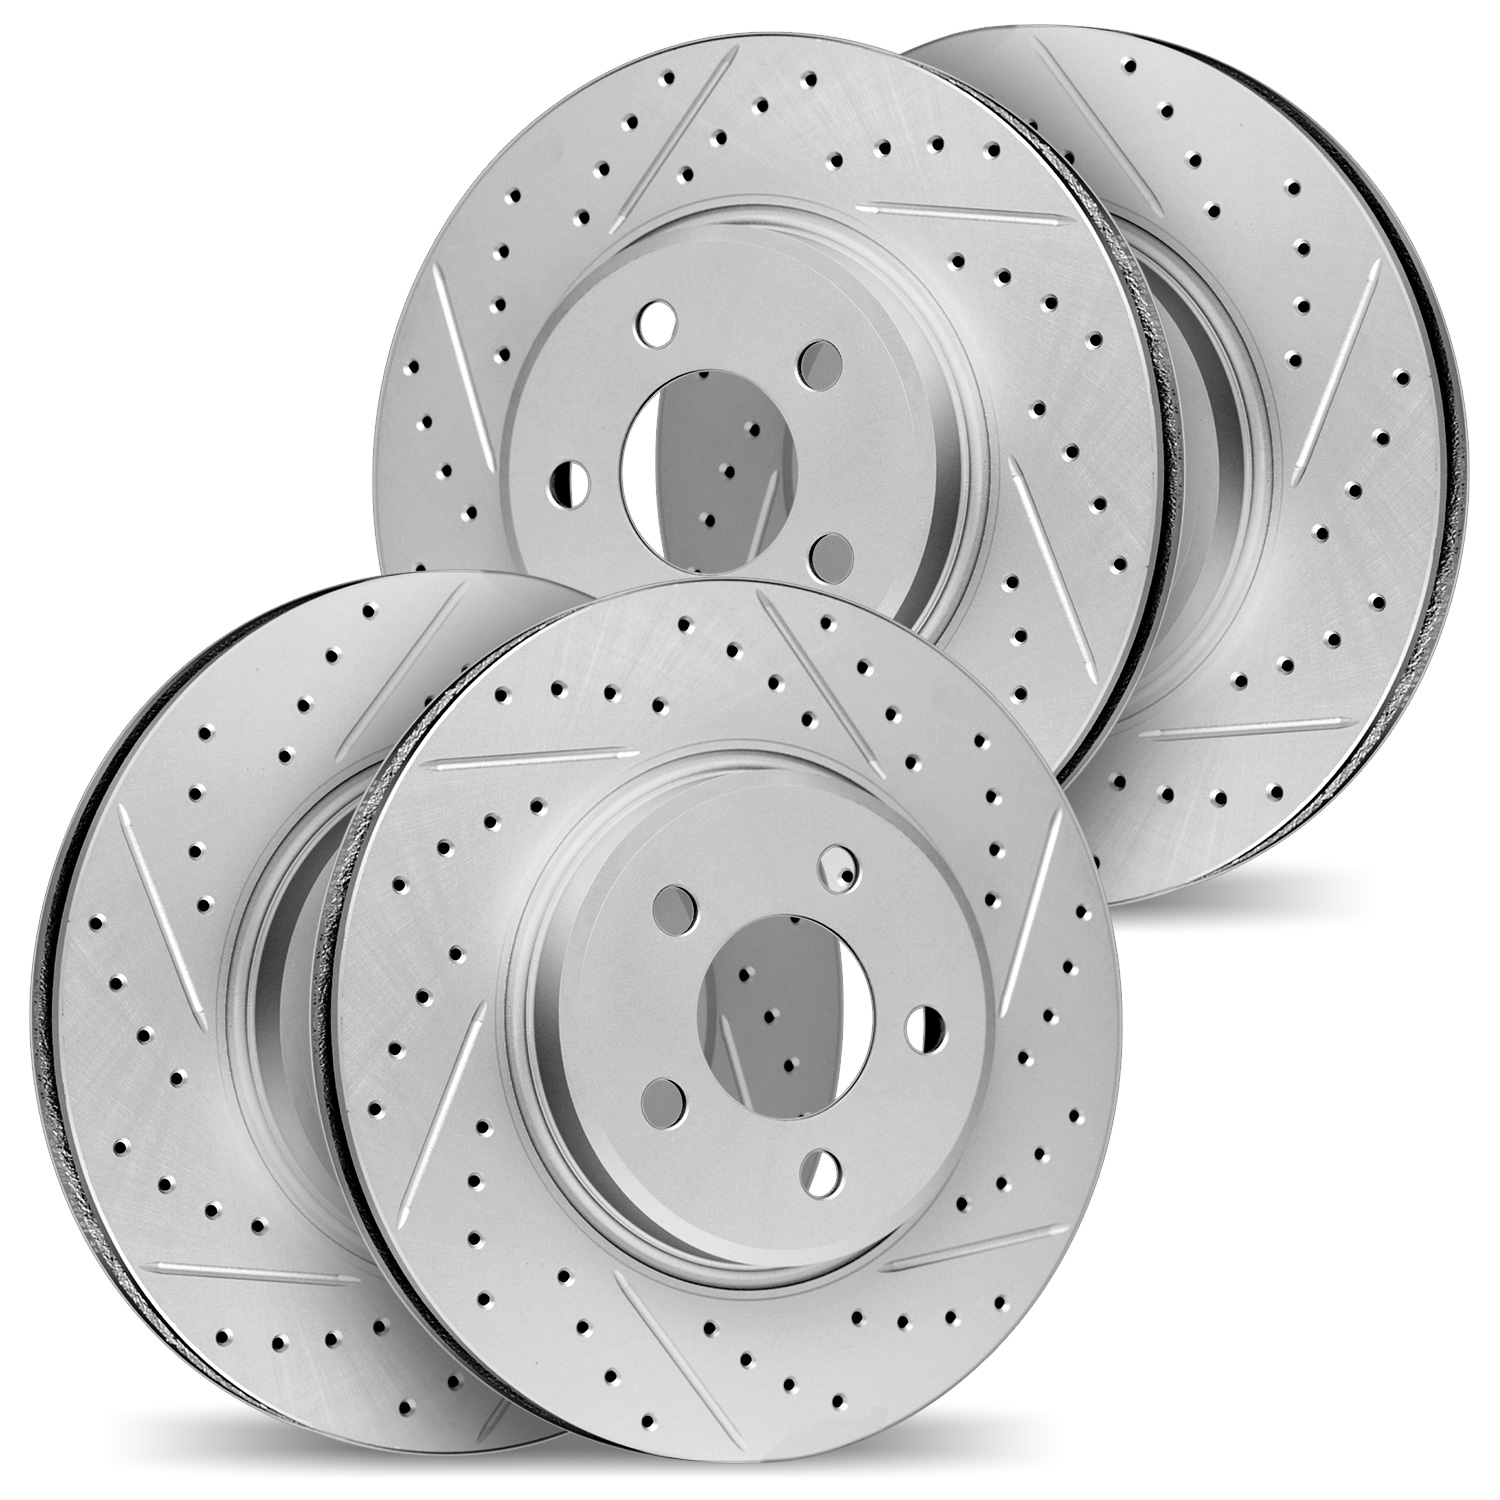 2004-74029 Geoperformance Drilled/Slotted Brake Rotors, 2002-2005 Audi/Volkswagen, Position: Front and Rear